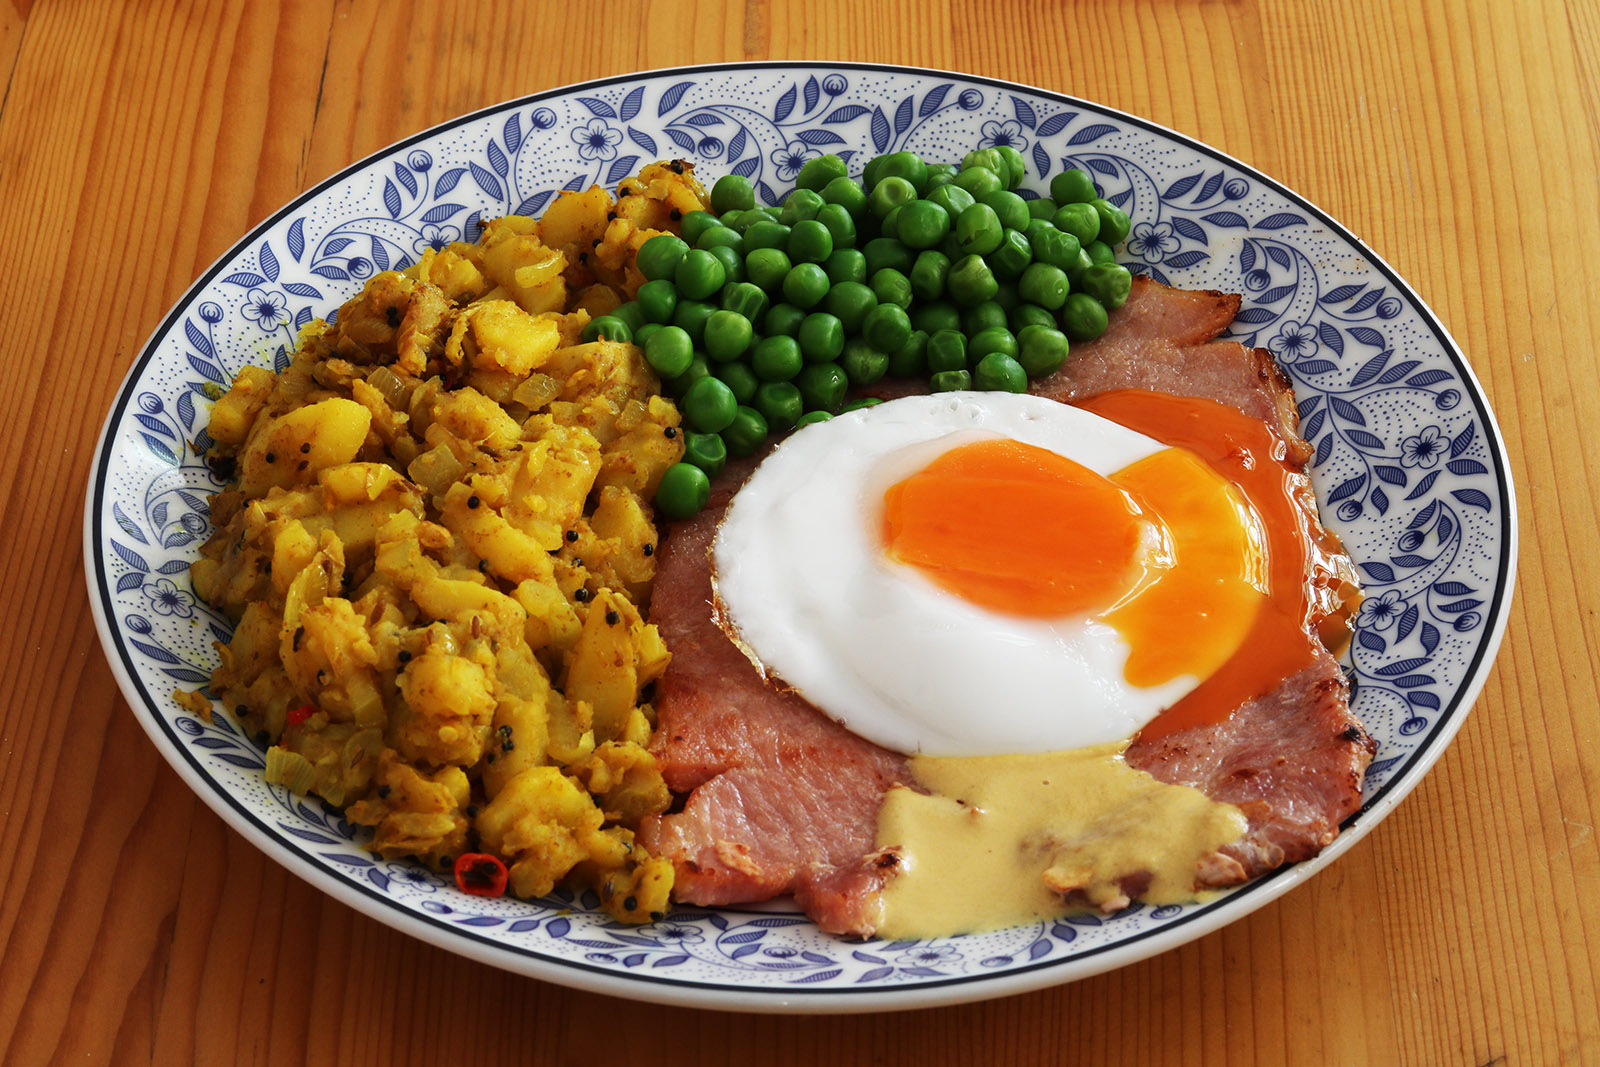 Gammon and hot and sour potatoes 2 s.jpg